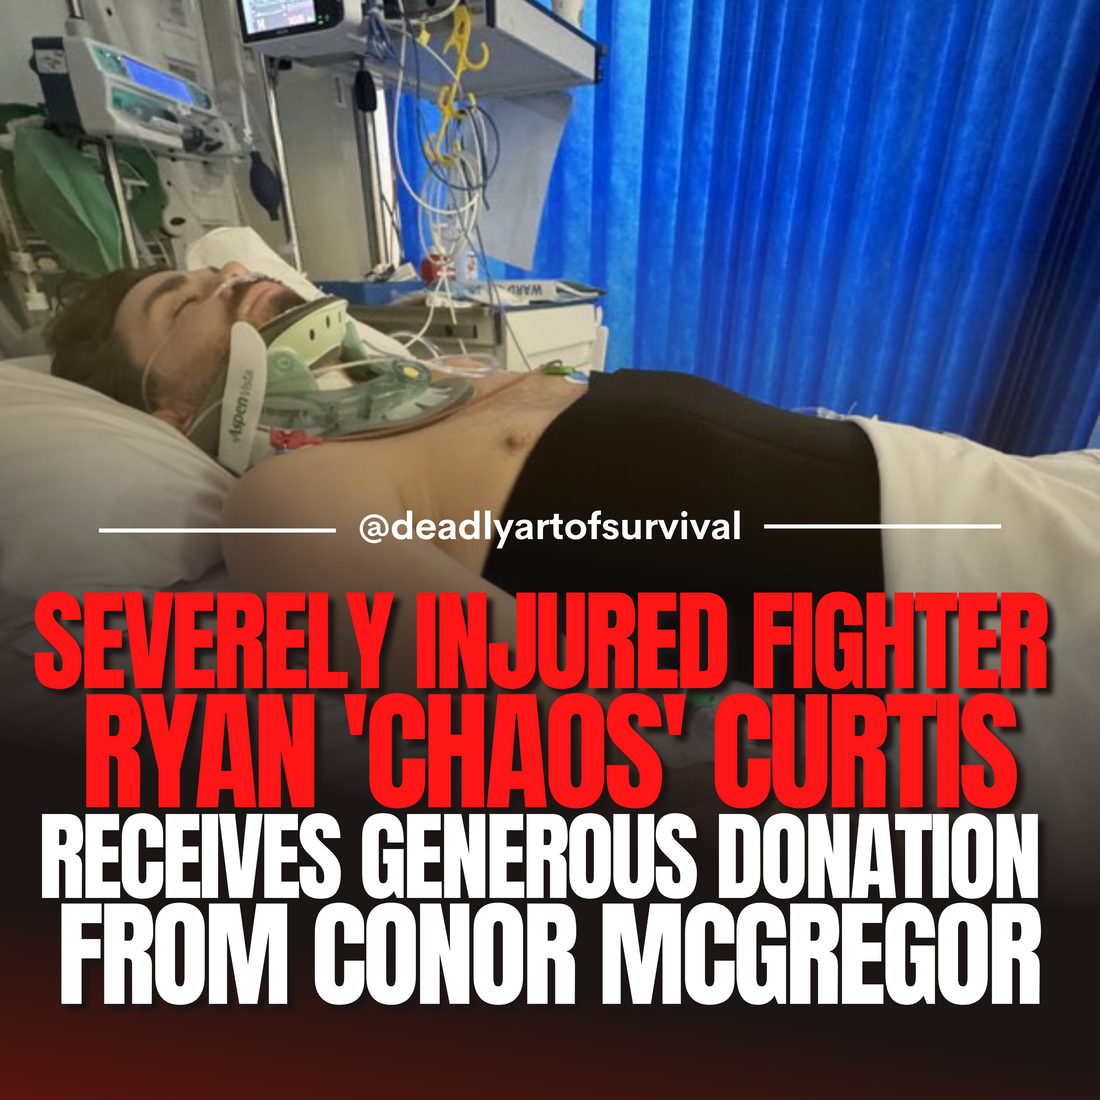 severely-Injured-Fighter-Ryan-Chaos-Curtis-receives-Generous-Donation-From-Conor-McGregor-The-Game-Isn-t-Worth-The-Risk deadlyartofsurvival.com